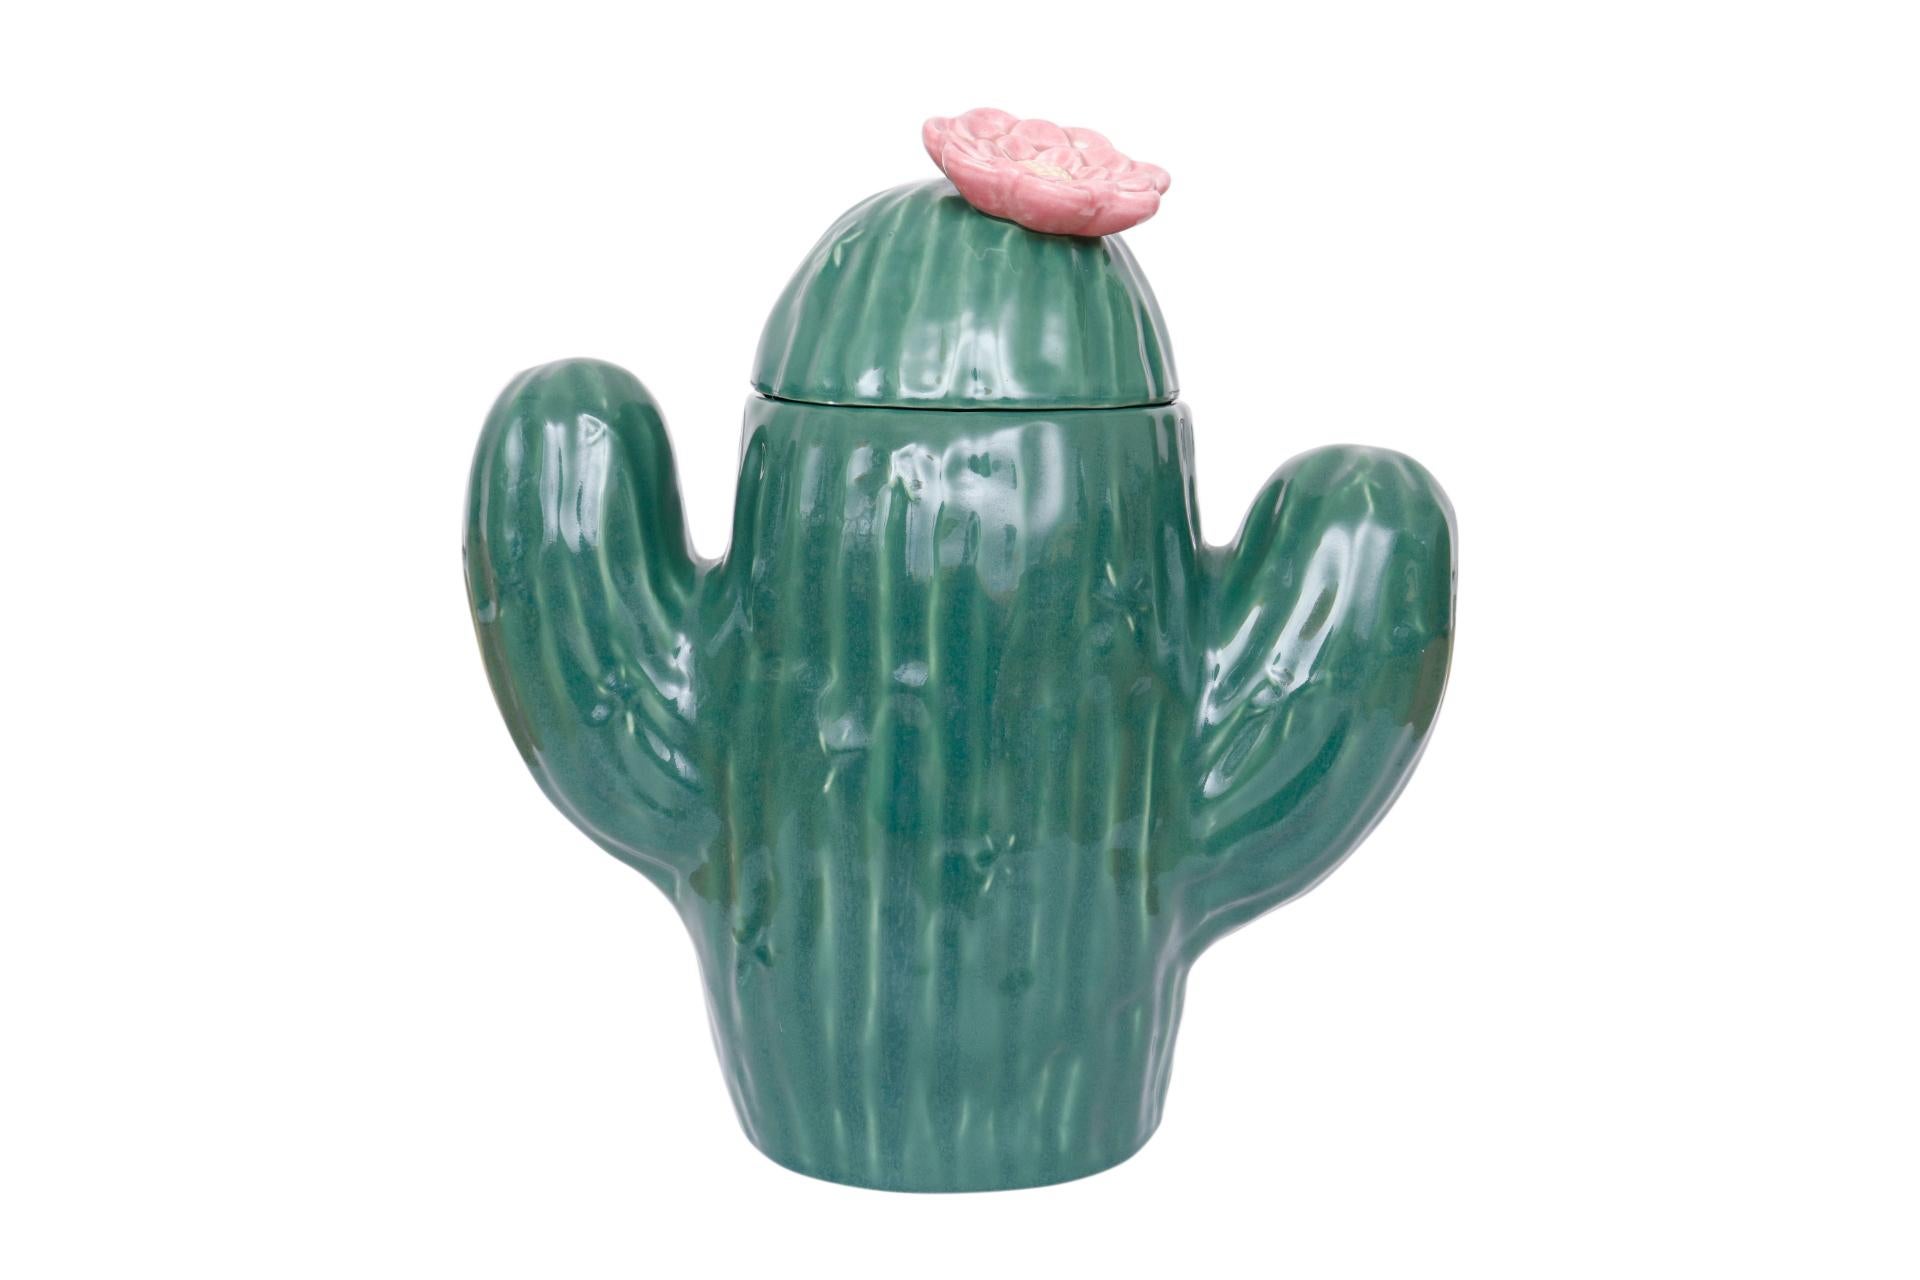 A saguaro cactus shaped cookie jar made by Treasure Craft. Made of ceramic, the jar is decorated with gentle ridges and spines and the lid lifts off with a pink flower for a handle. The maker's name can be seen under the lid.